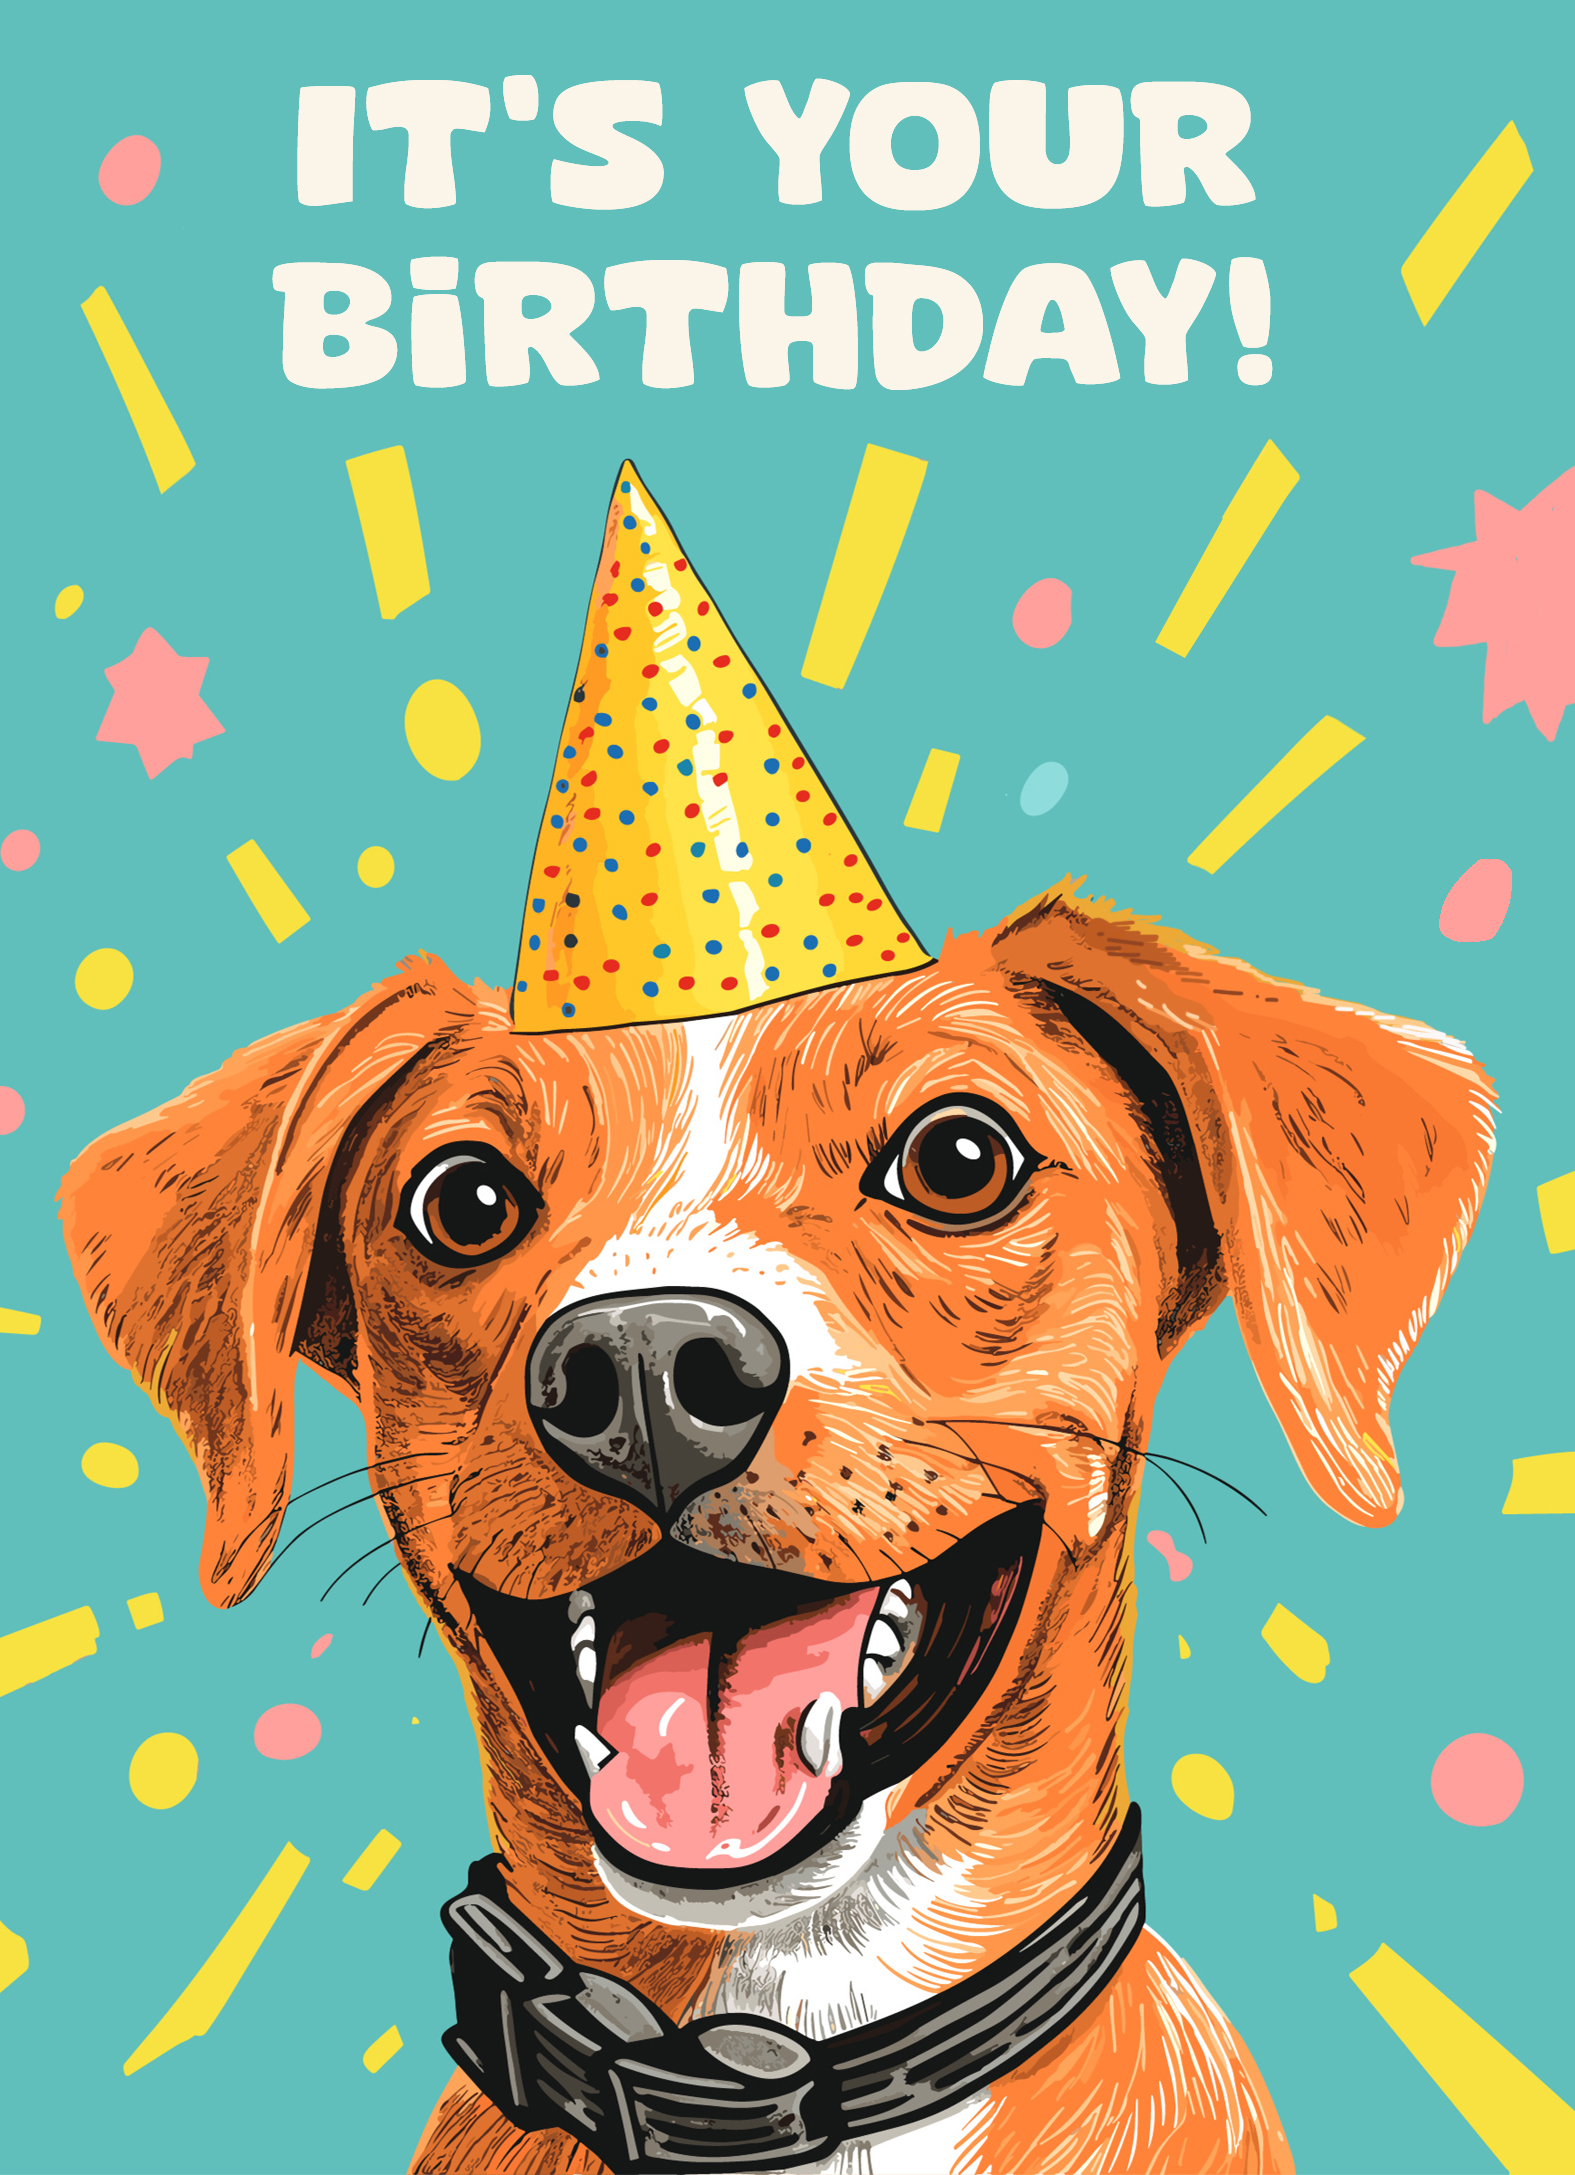 Your Birthday Dog  Card Cover